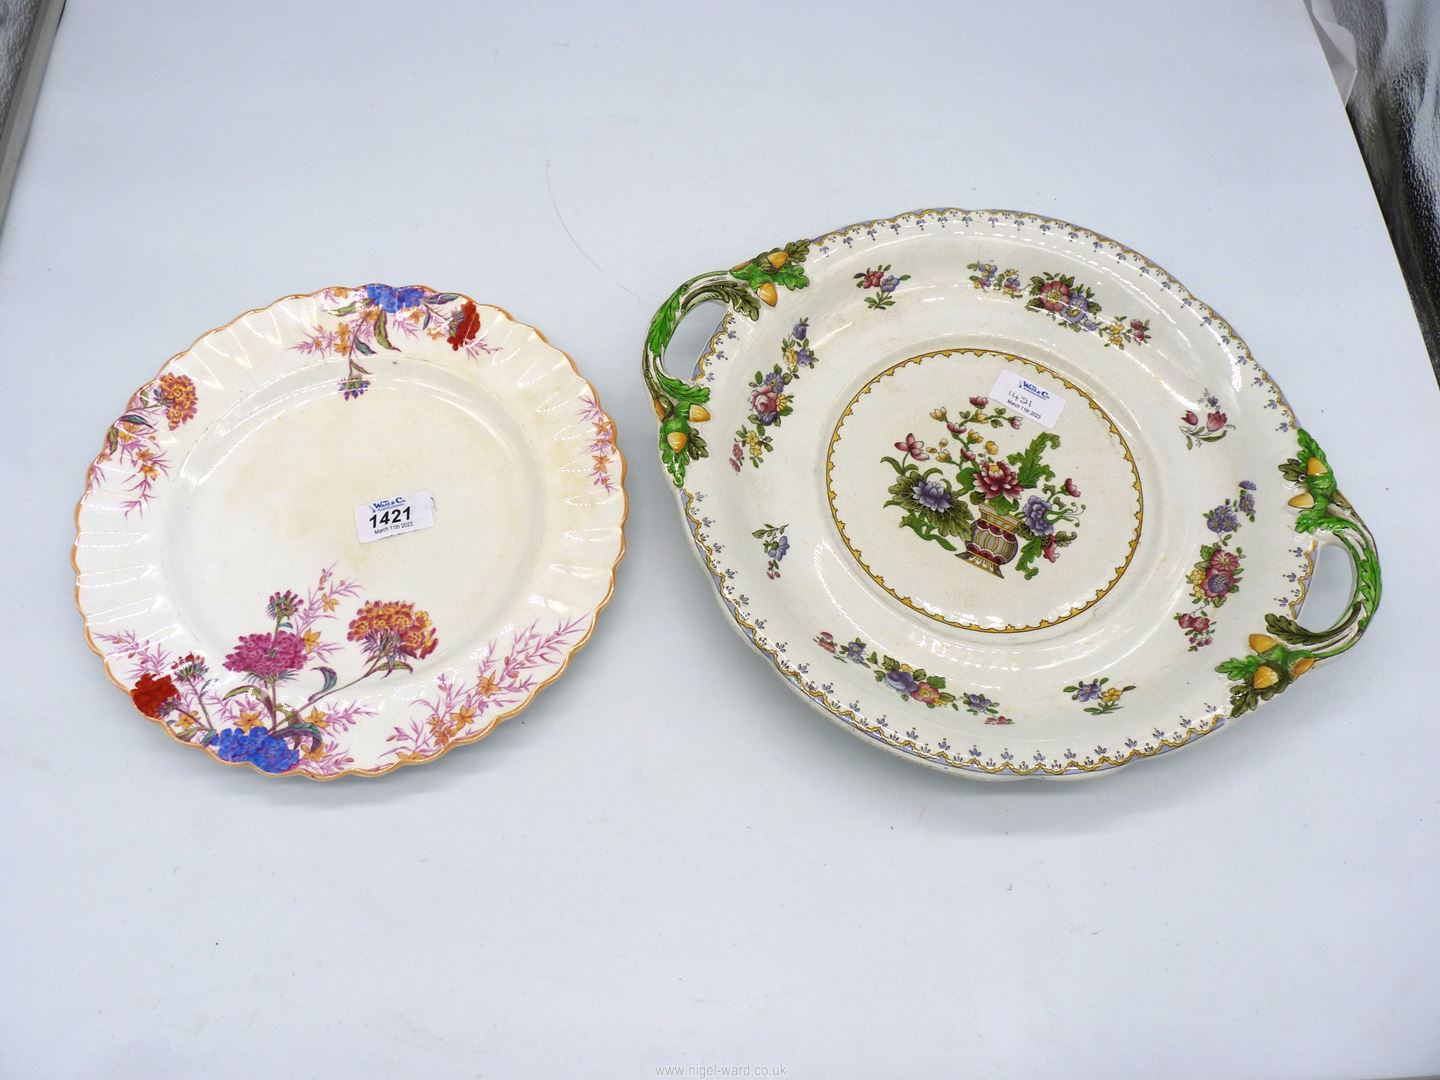 A very pretty Copeland serving platter/tray in 'Peplow' design and a Spode plate in 'Chelsea